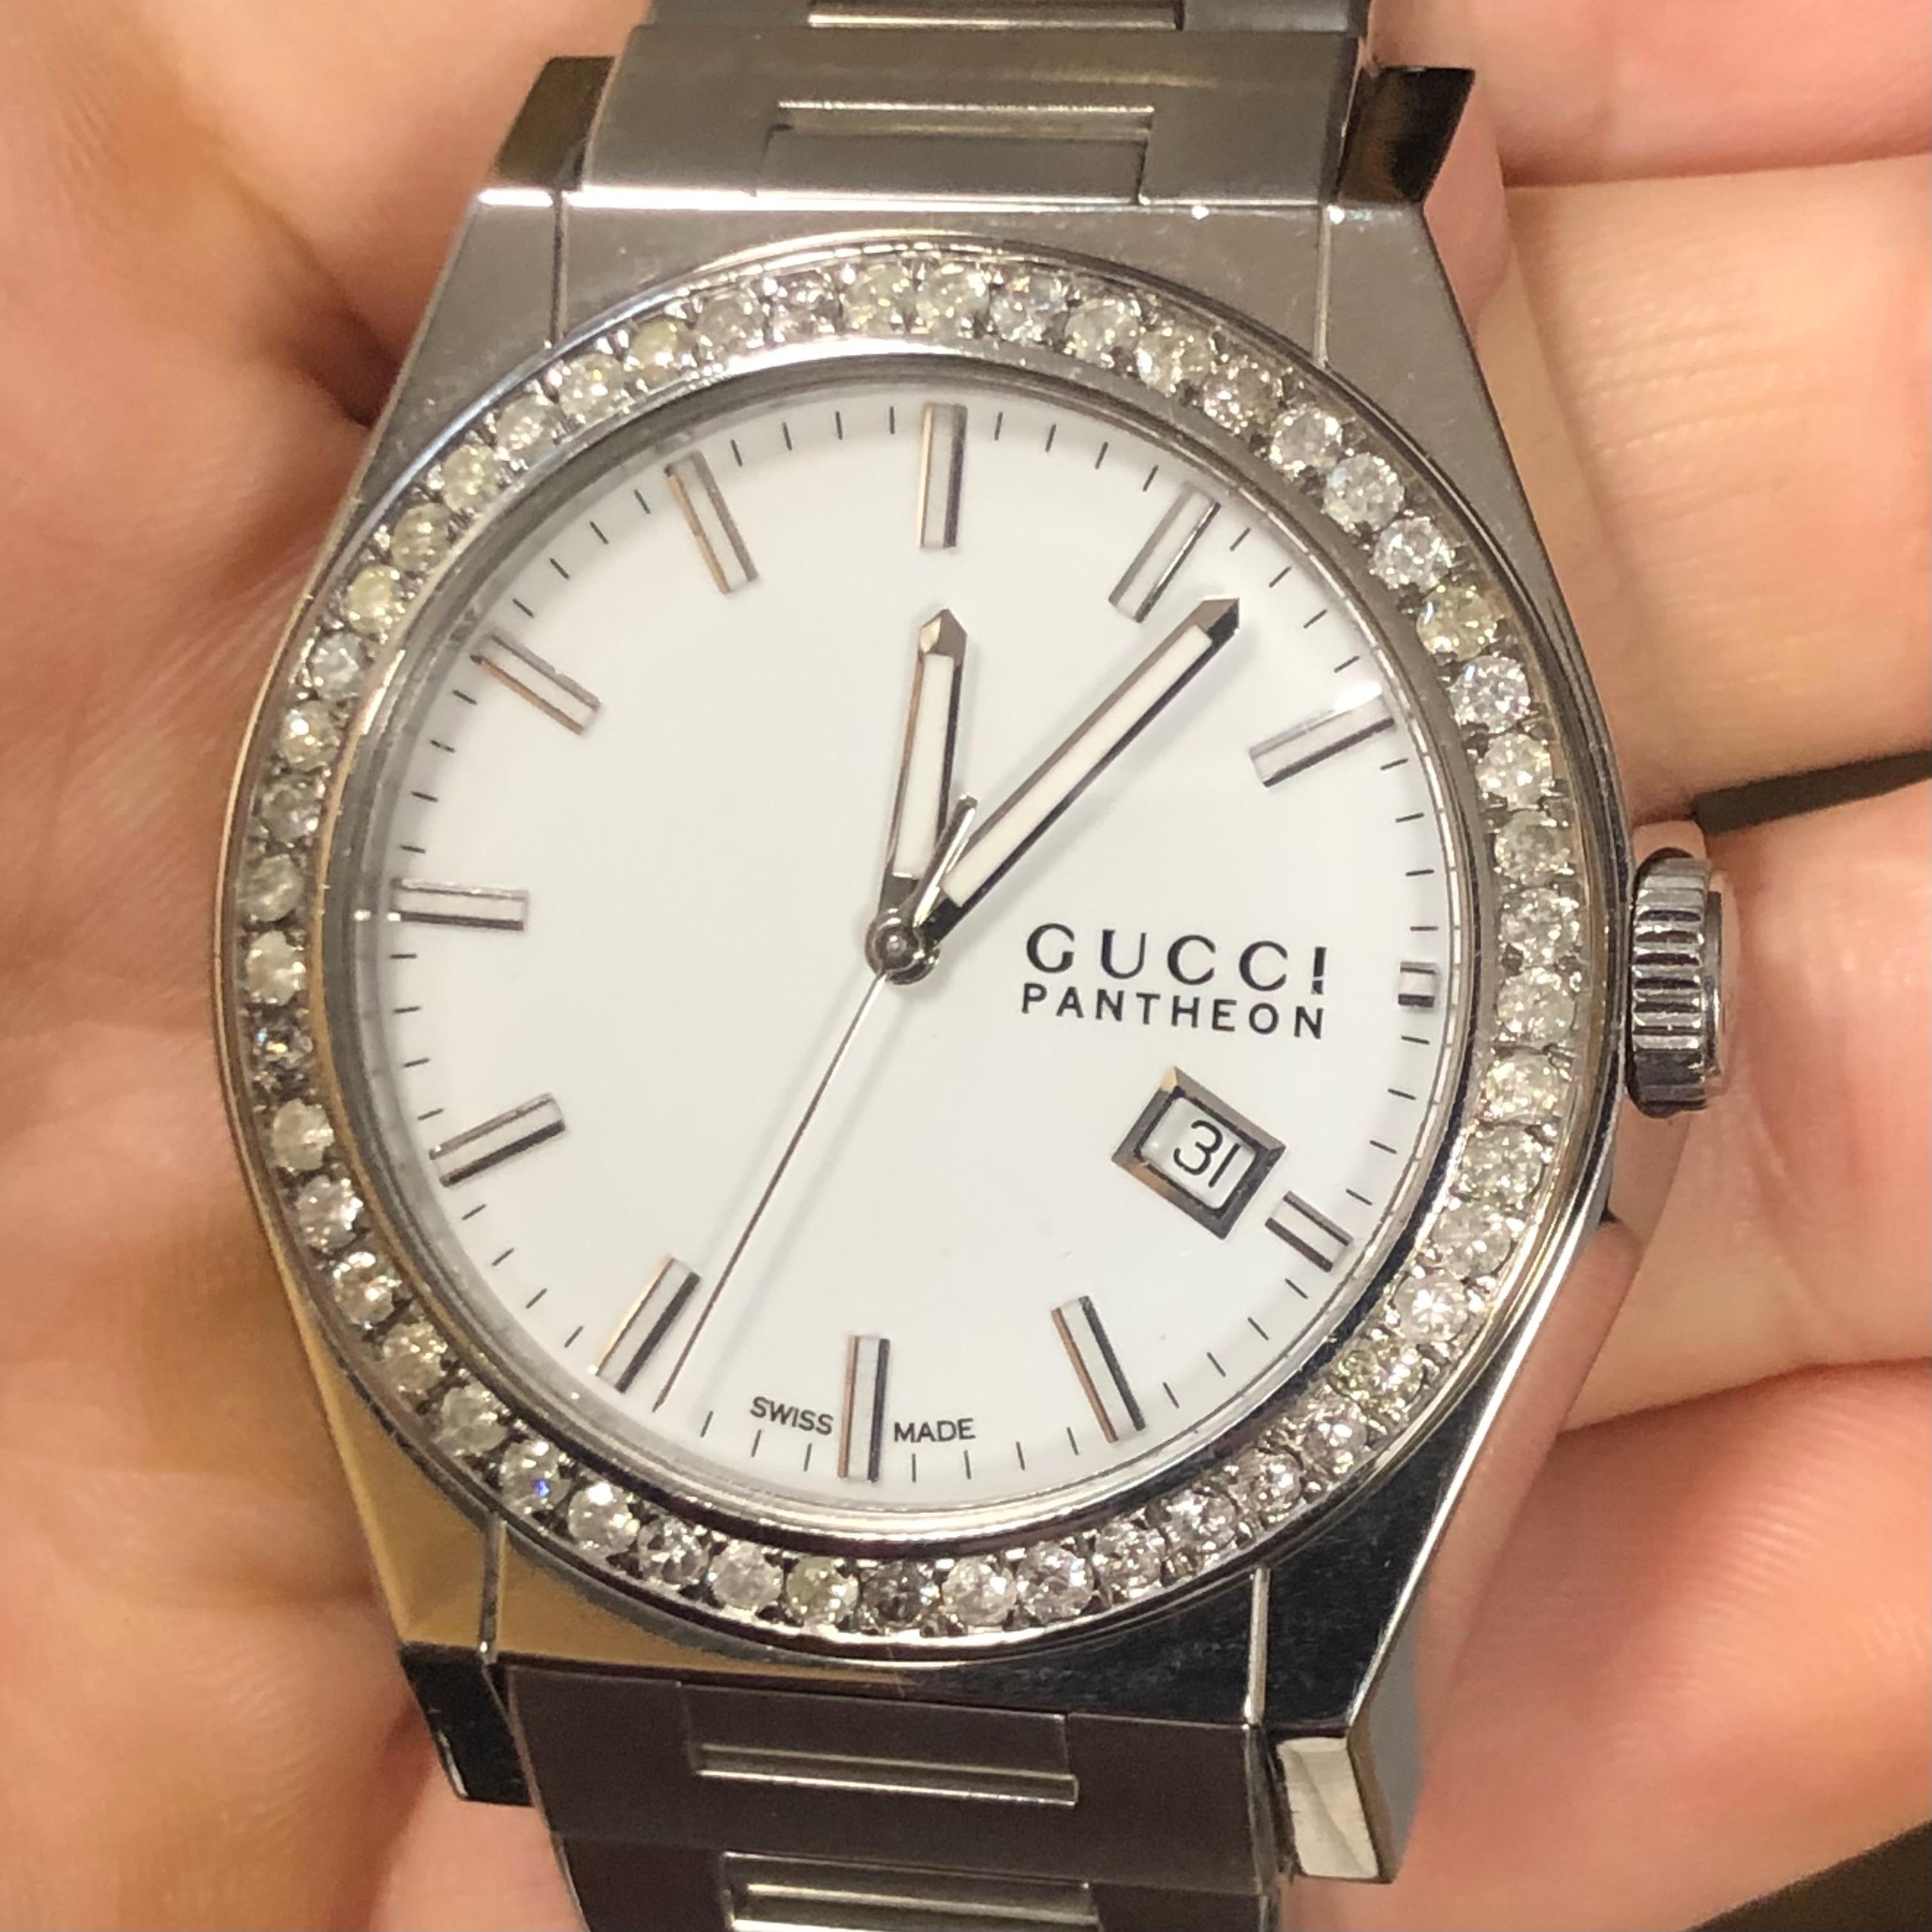 Custom Diamond Gucci Men's Pantheon Watch 42mm with box and booklet papers.

Original Gucci Bezel customized hand-set with approx. 2.00 carats of natural genuine earth-mined SI-I Diamonds. The diamonds shine beautifully in the light.

Custom Gucci